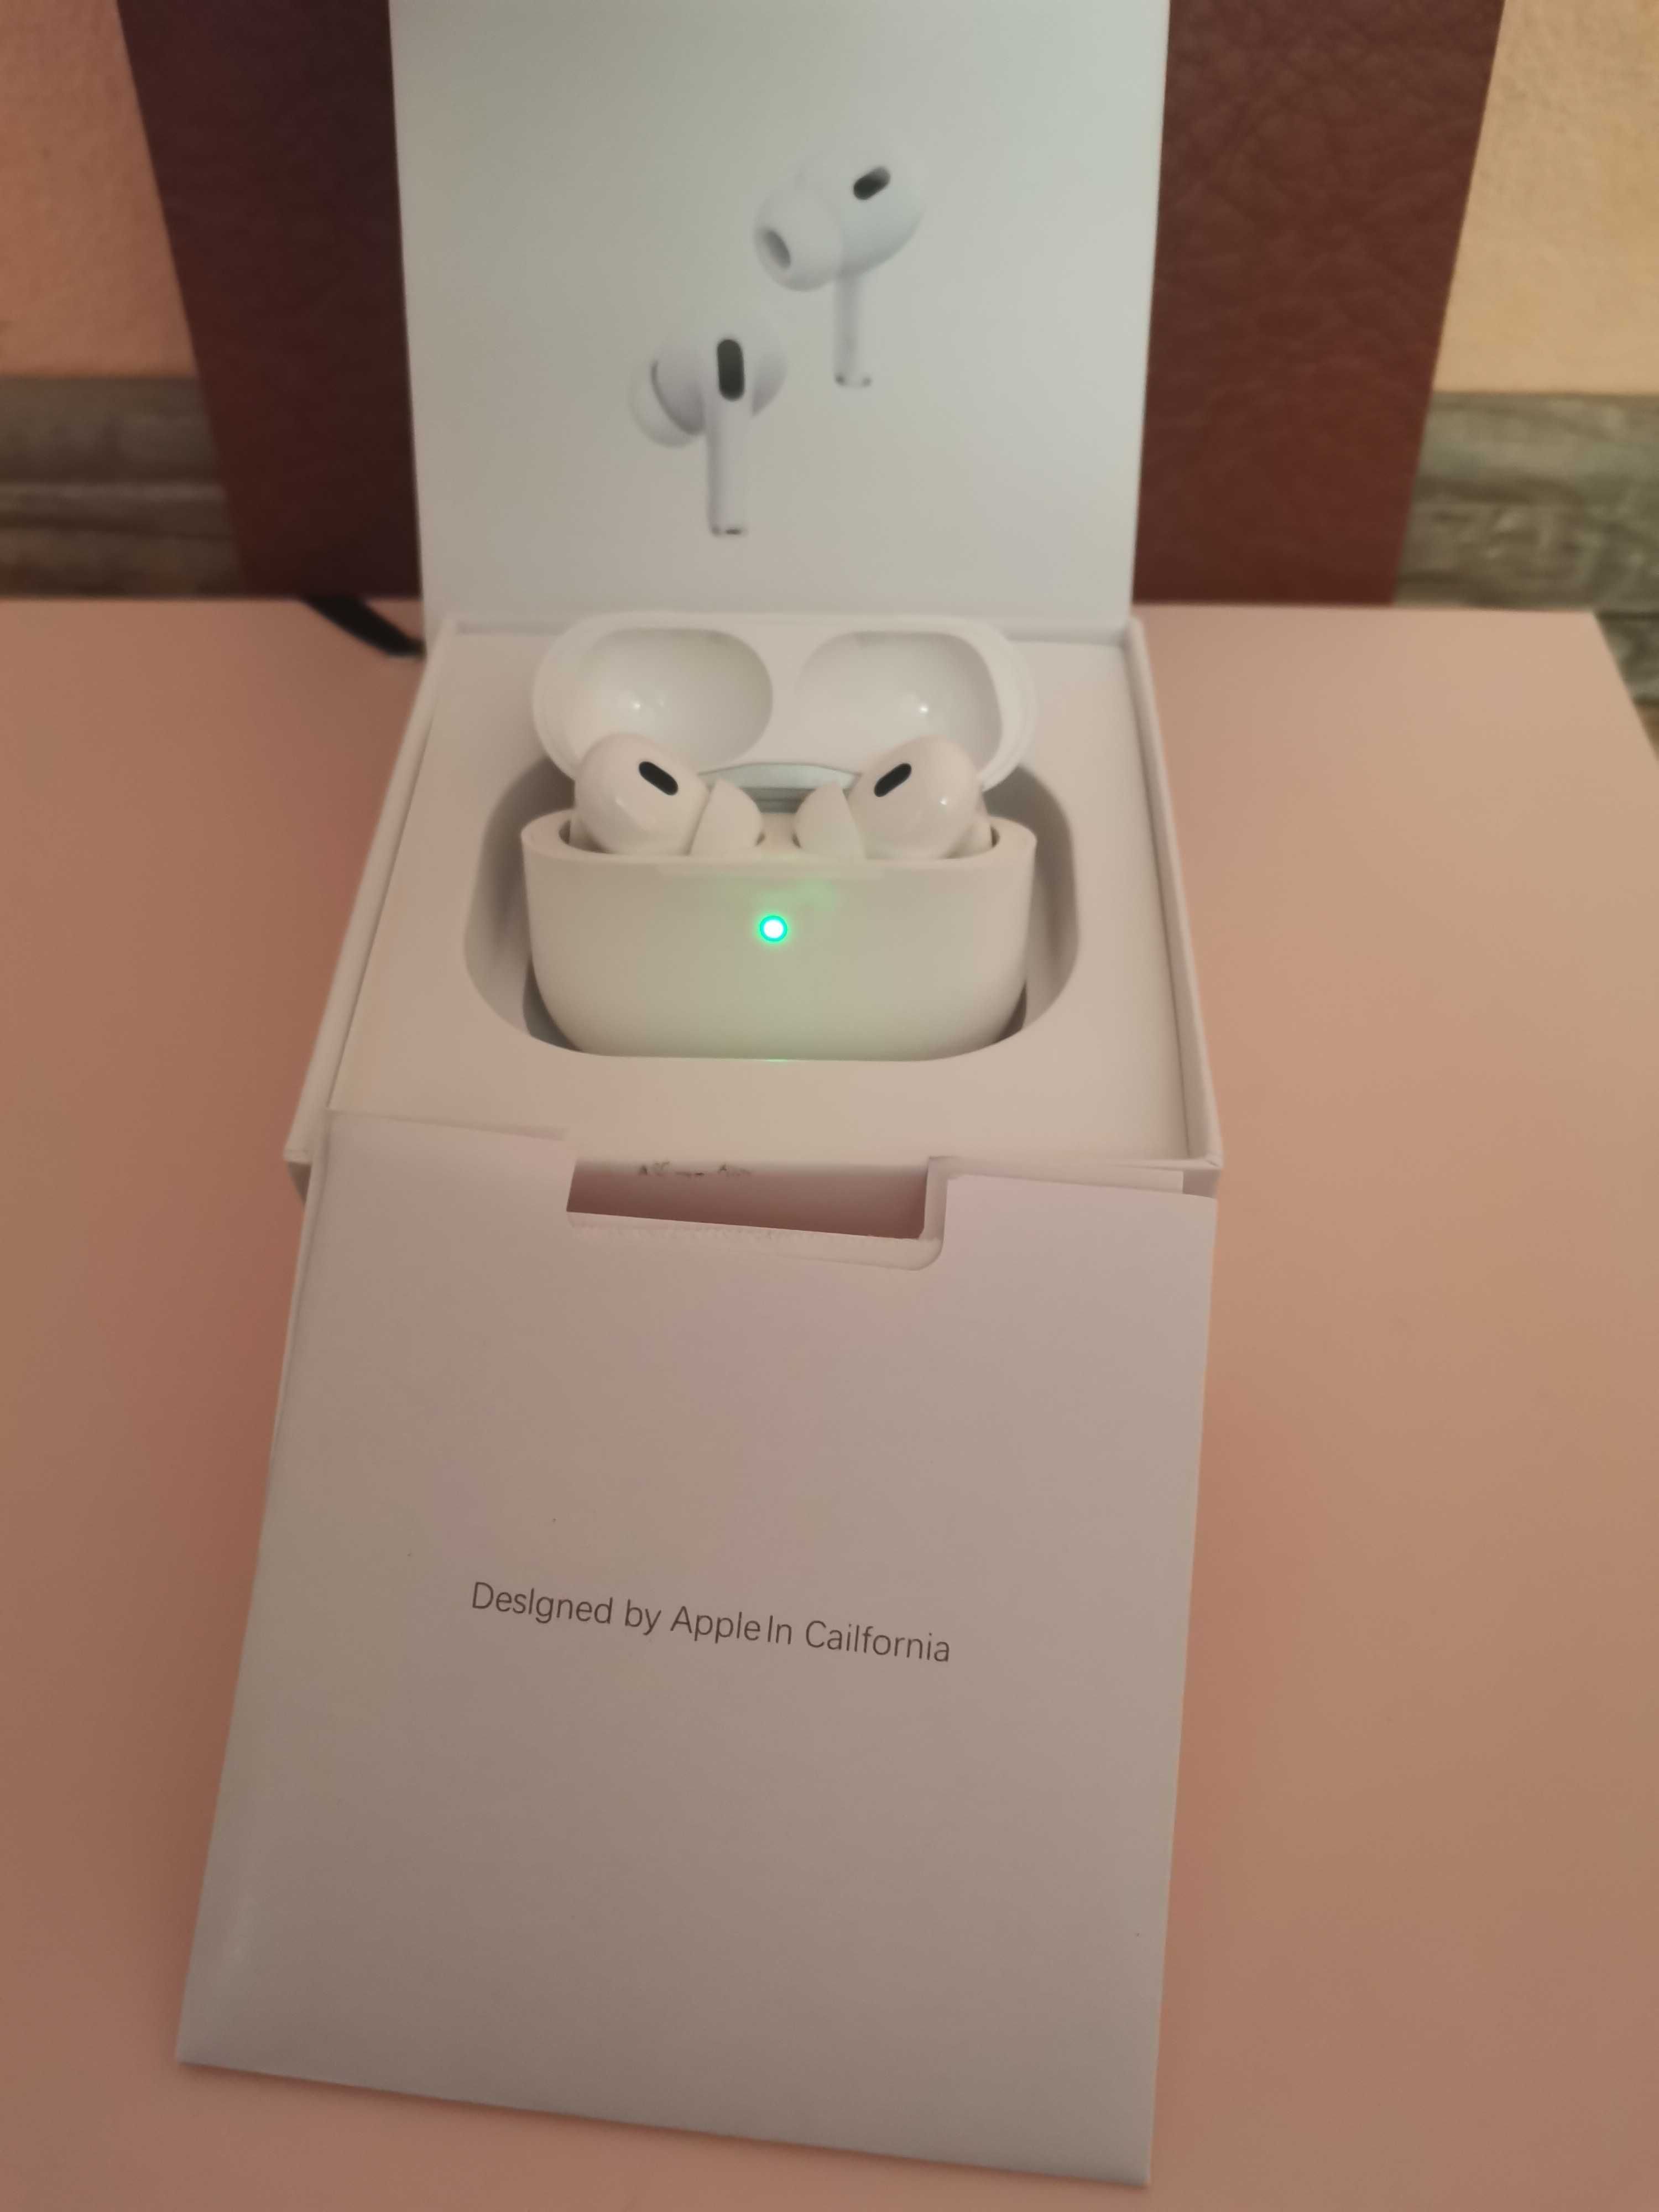 Airpods Pro / Airpods pro 2 / Airpods 3 gen